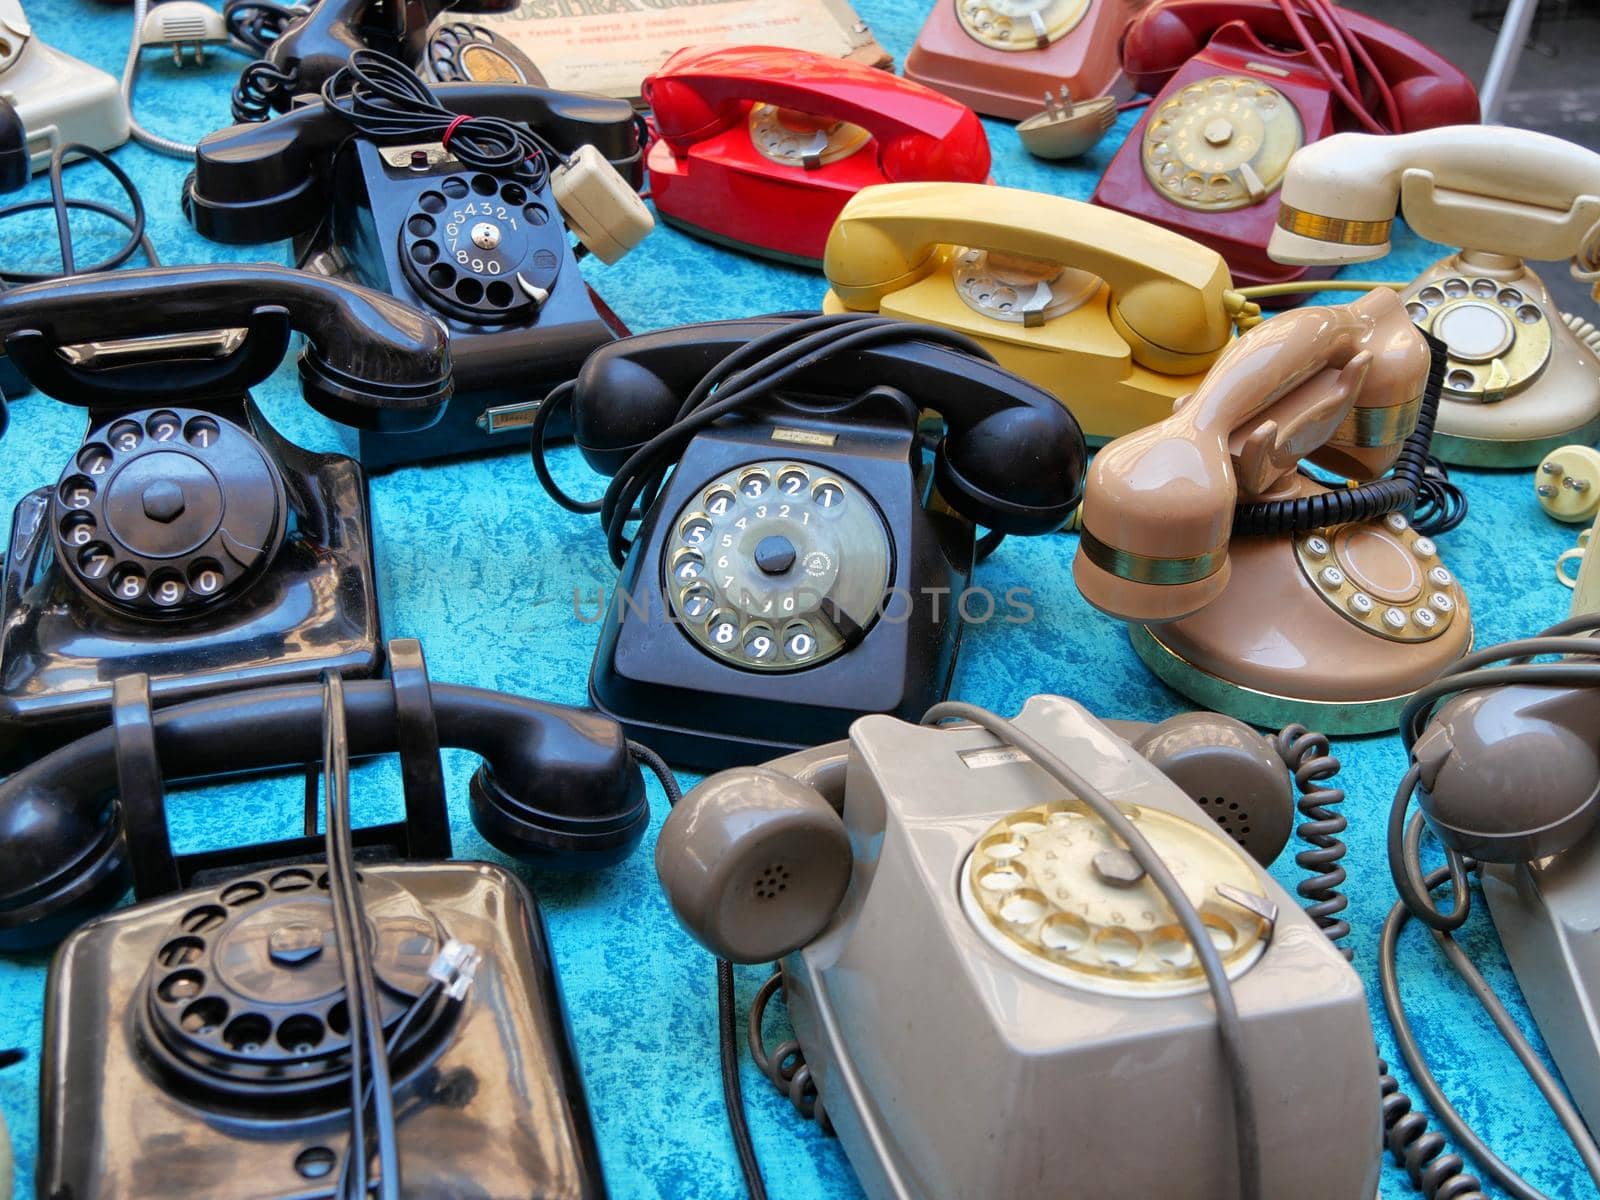 Vintage rotary dial telephones on display in flea market Turin Italy June 8 2019 by lemar